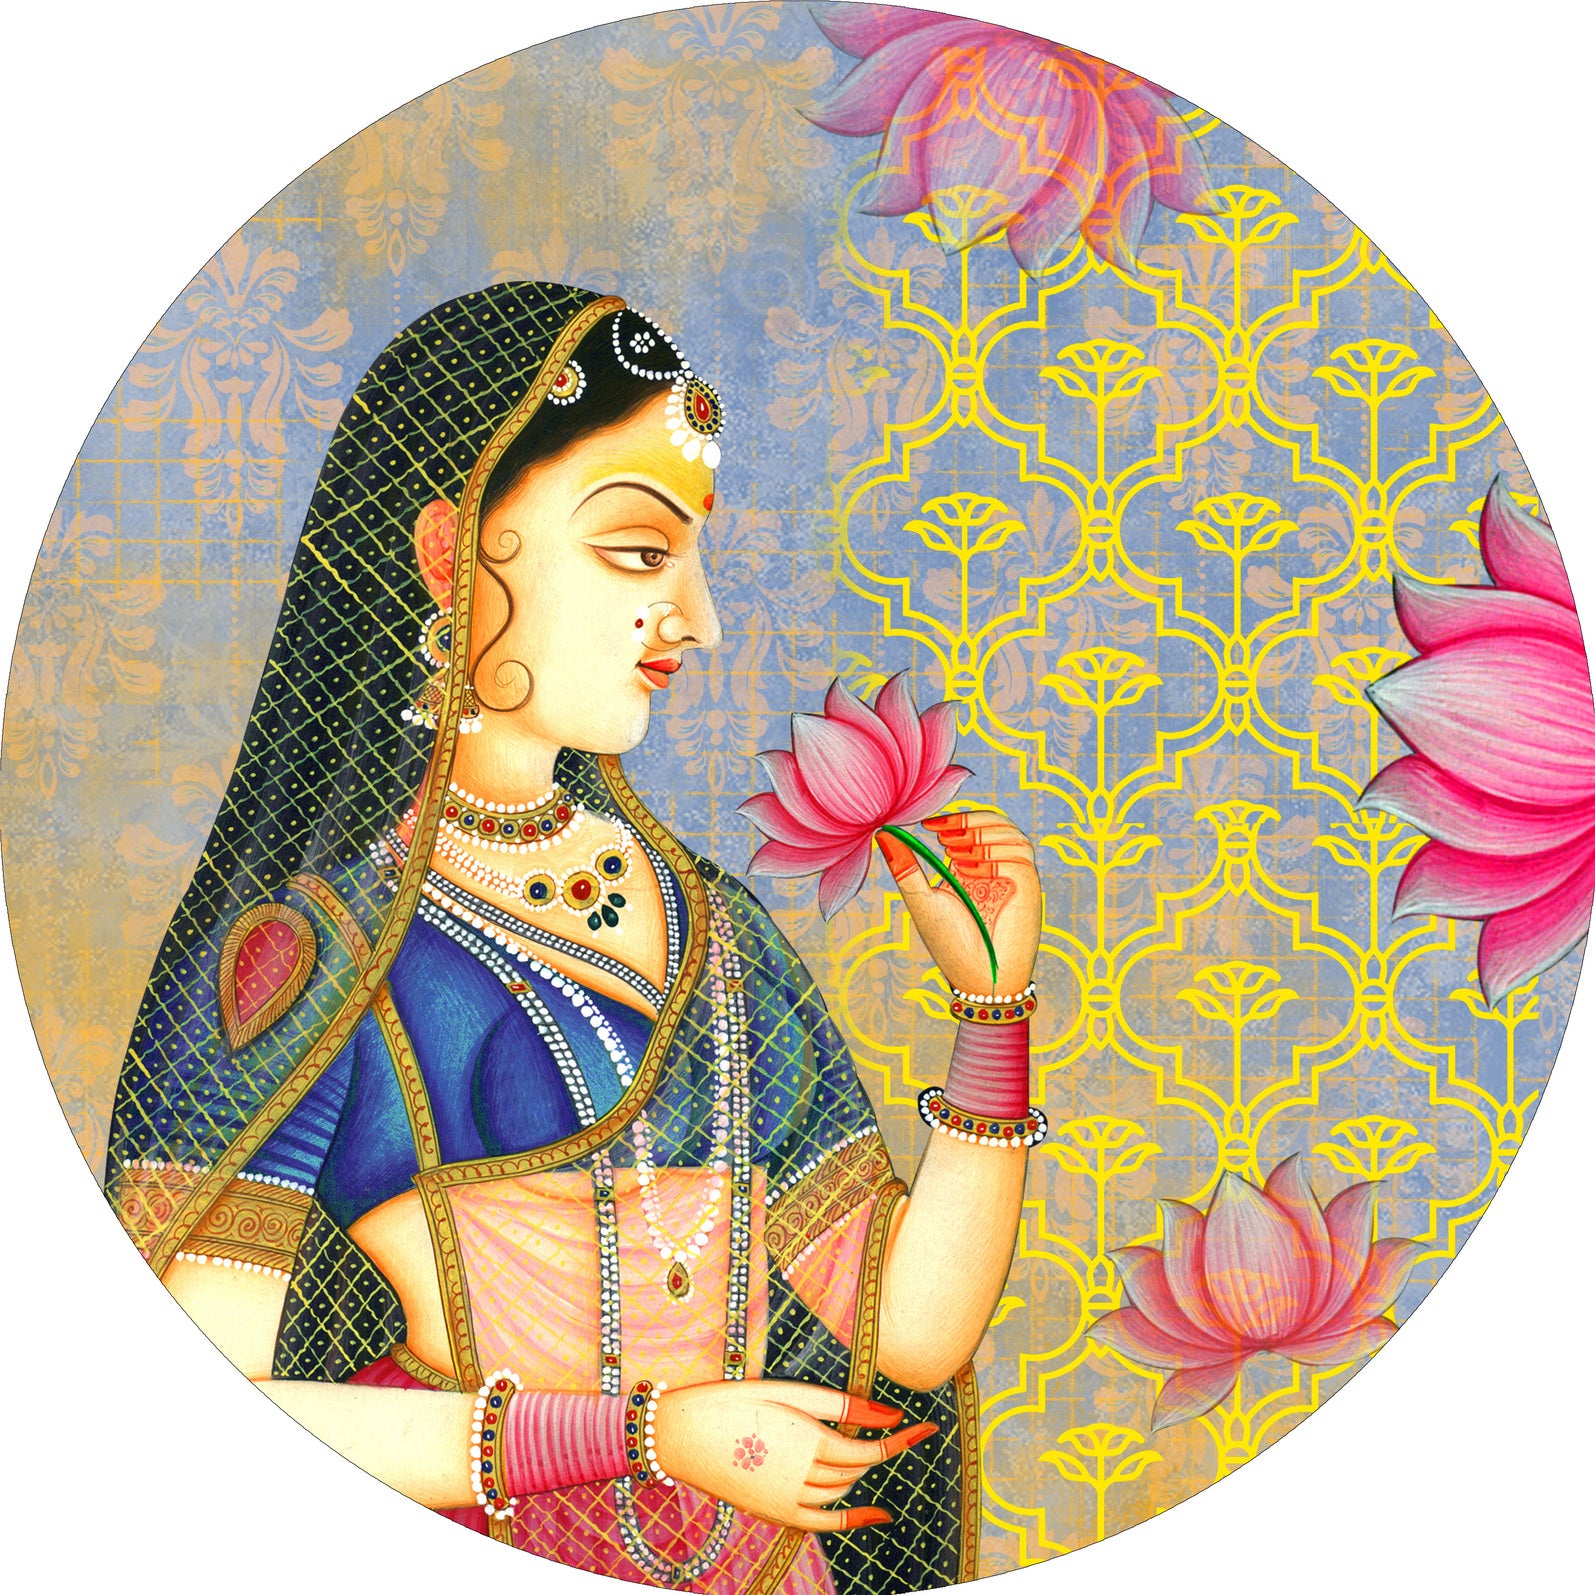 Decorative Wall Plate - Royal Throne